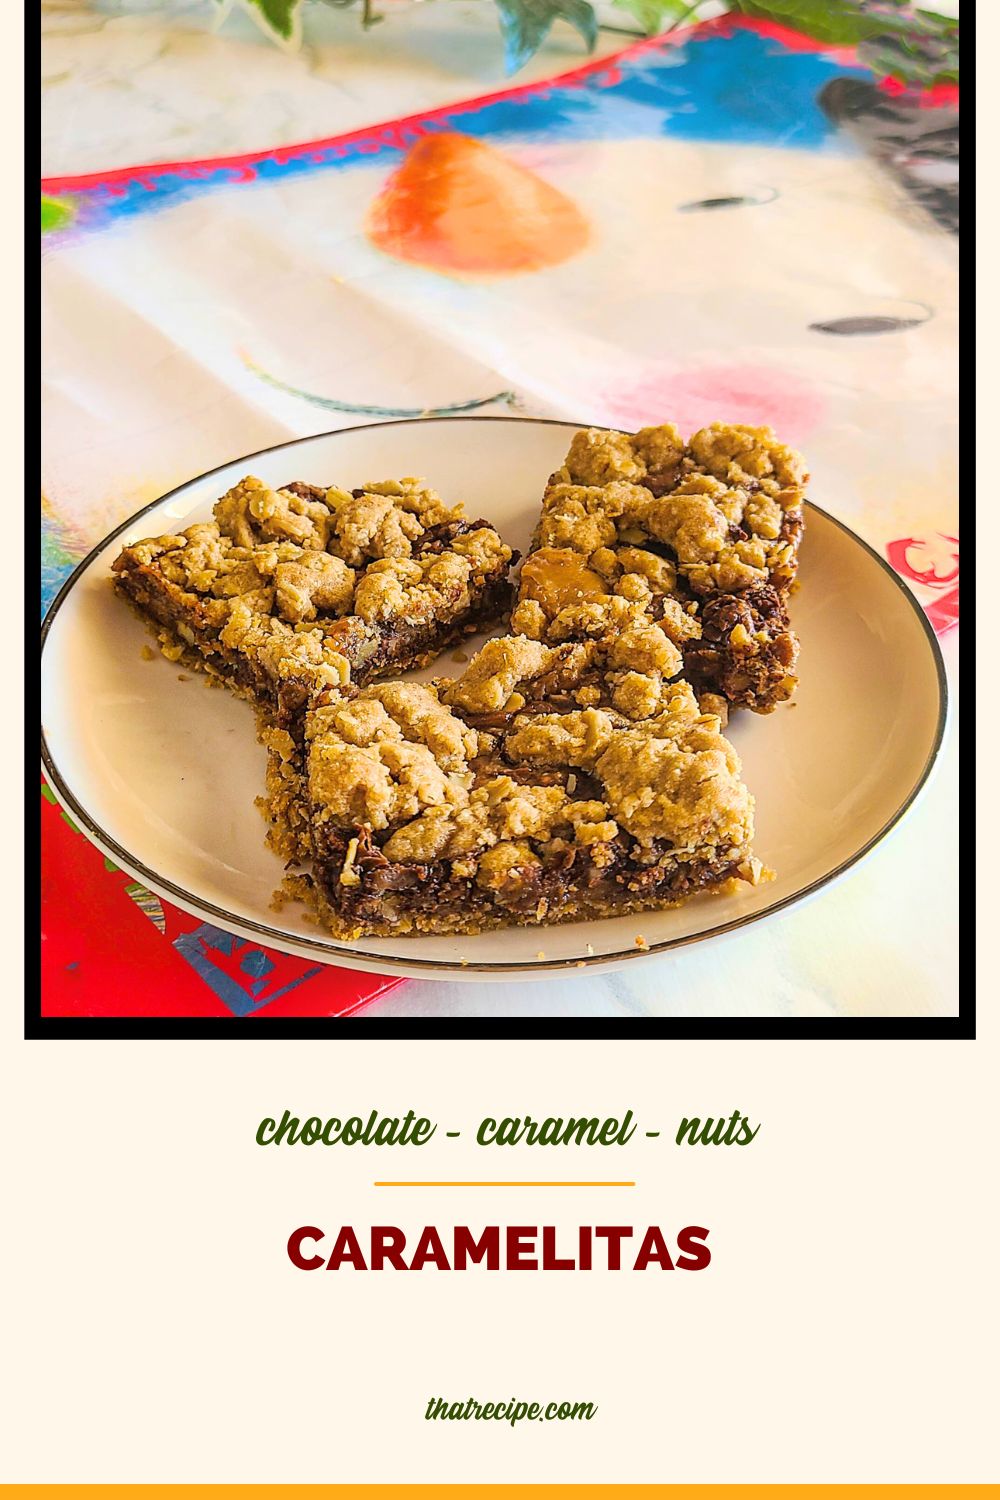 chocolate oatmeal cookie bars on a plate with text overlay "caramelitas"